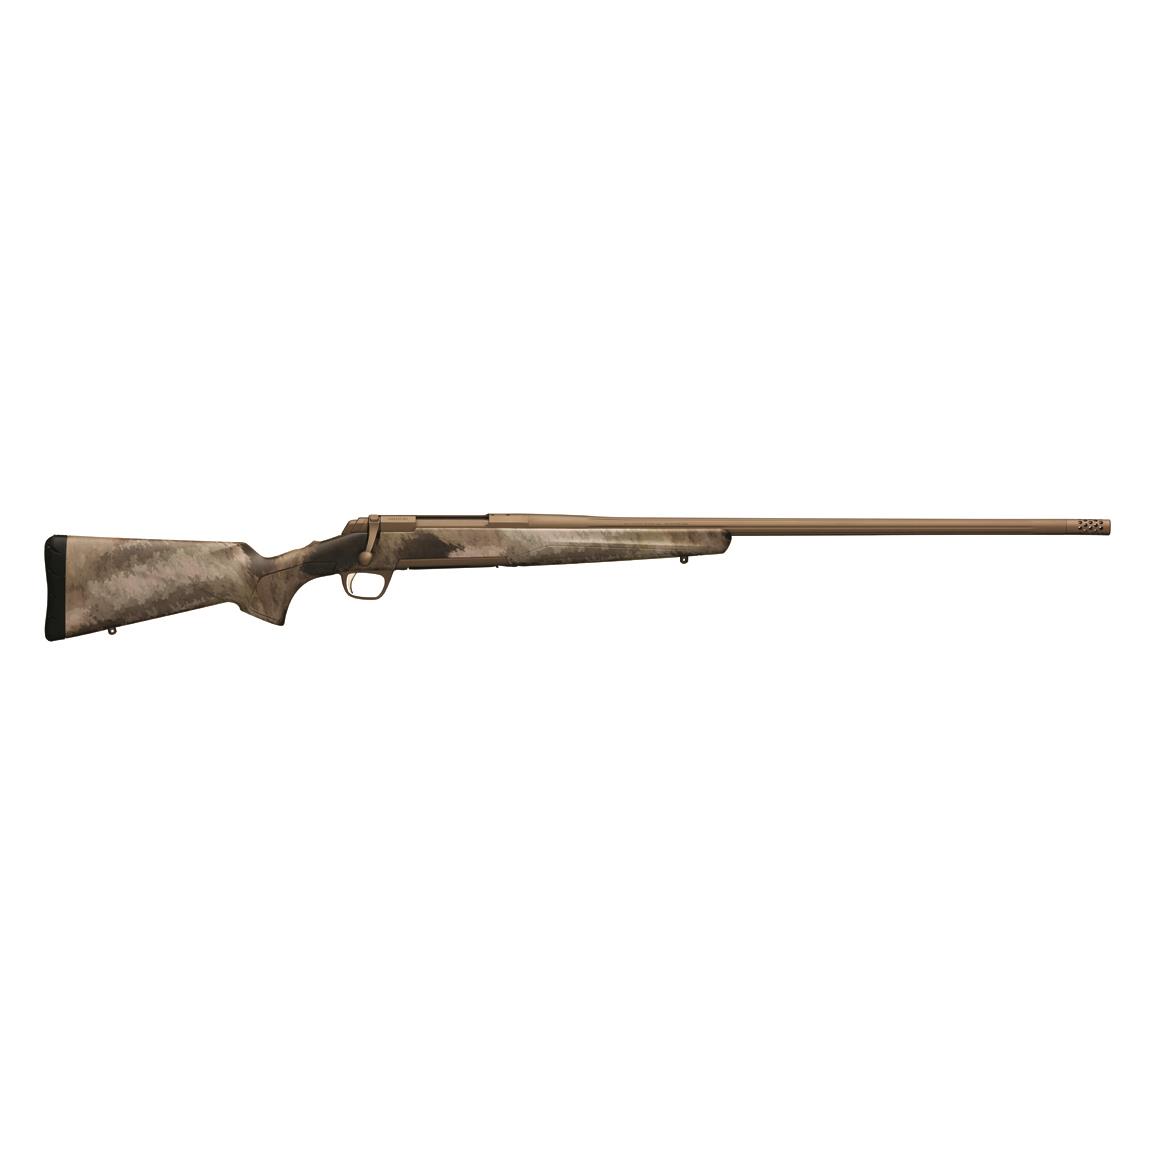 Browning X-Bolt Hell's Canyon Long Range, Bolt Action, 6.5mm Creedmoor, 26" Barrel, 4 1 Rounds